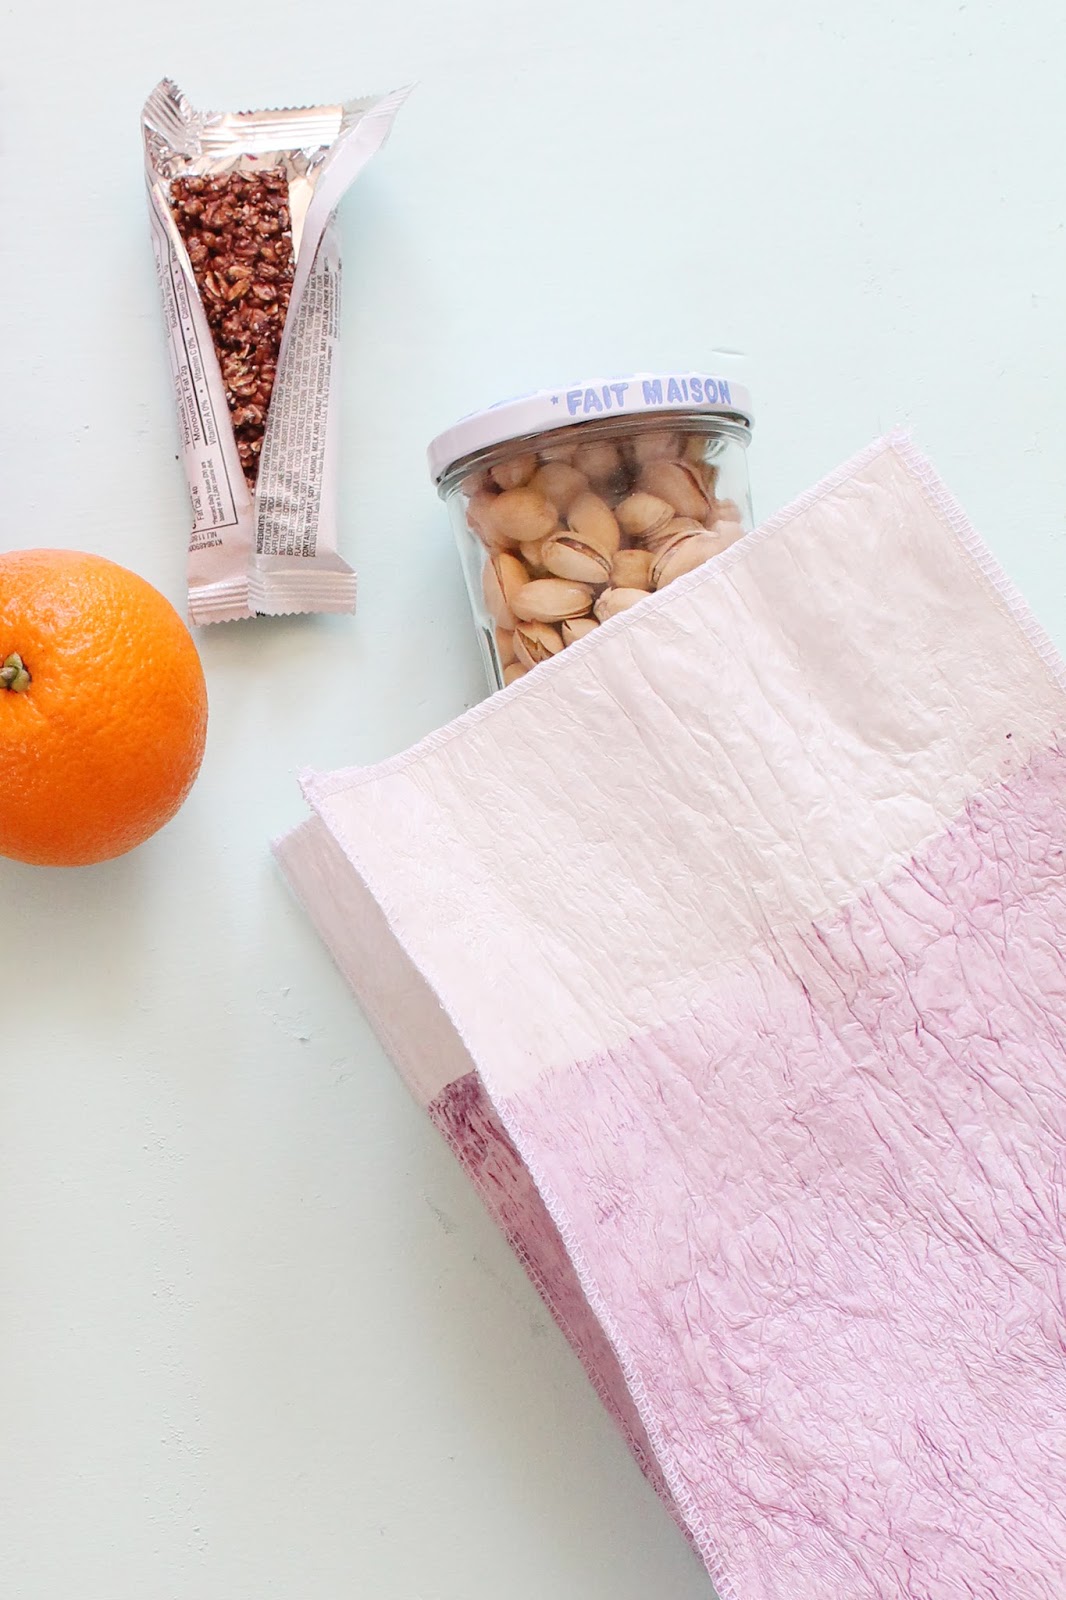 Make a dyed lunch sack from recycled plastic bags.